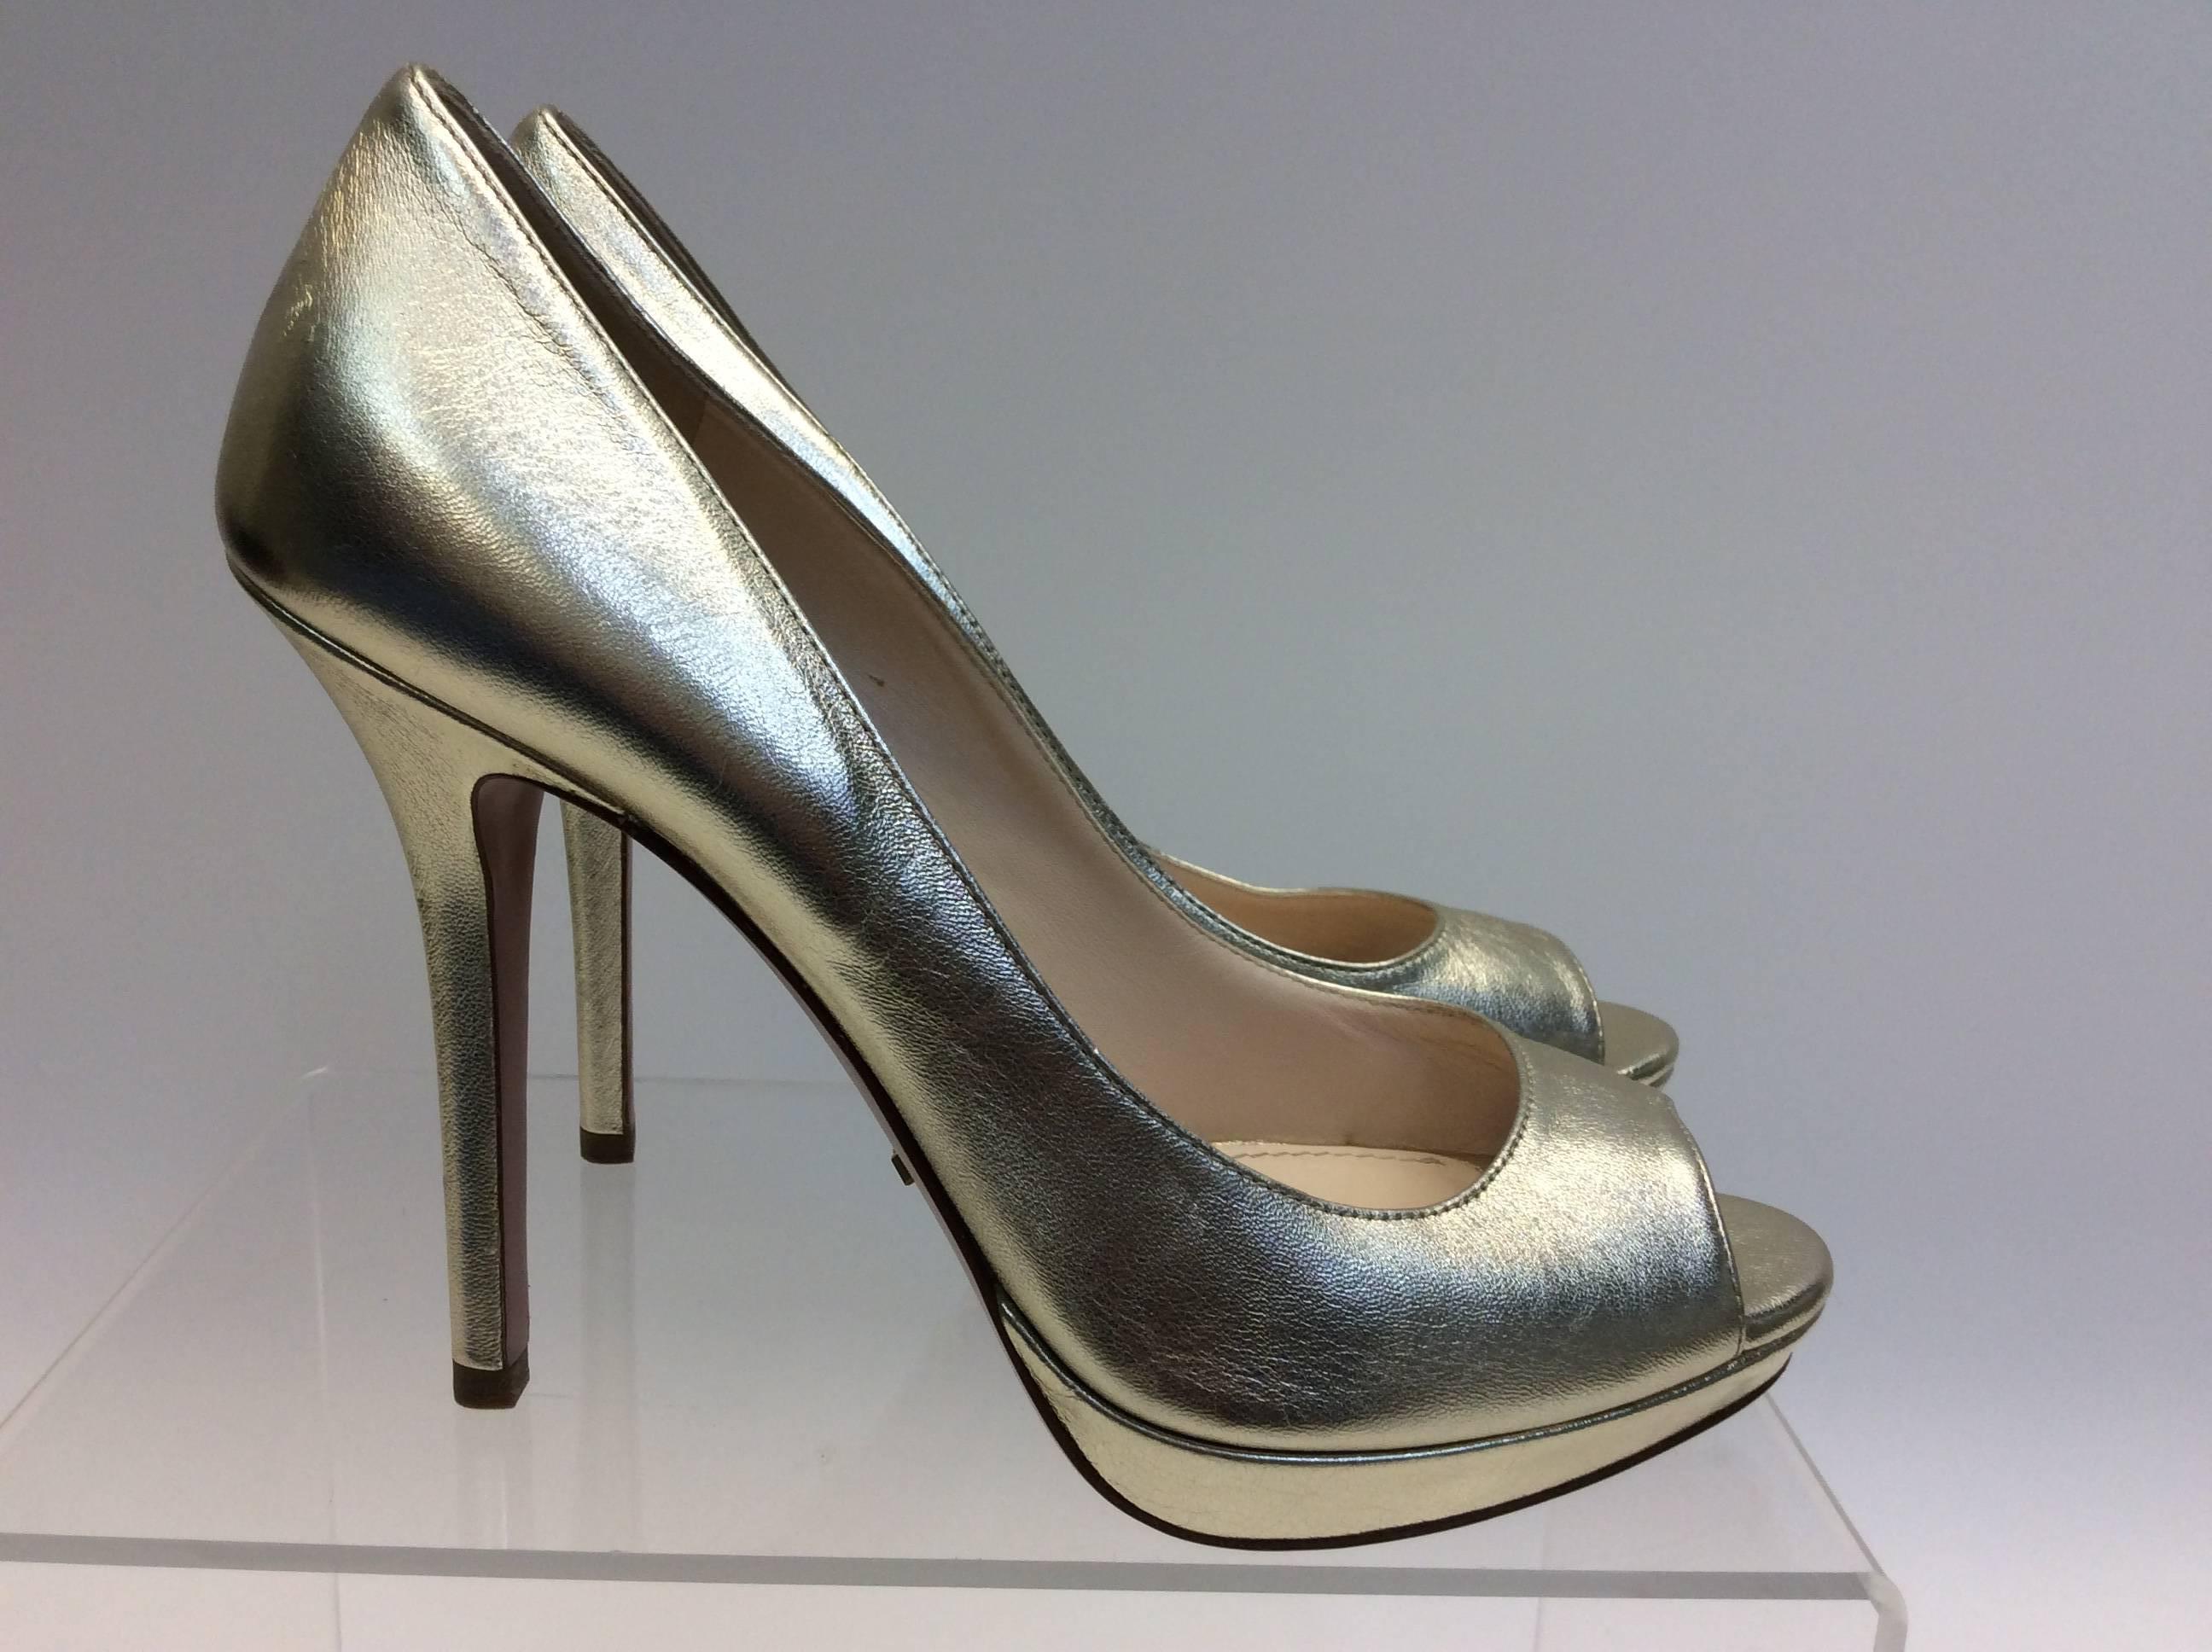 Prada Gold Leather Peep Toe Pump In Excellent Condition For Sale In Narberth, PA